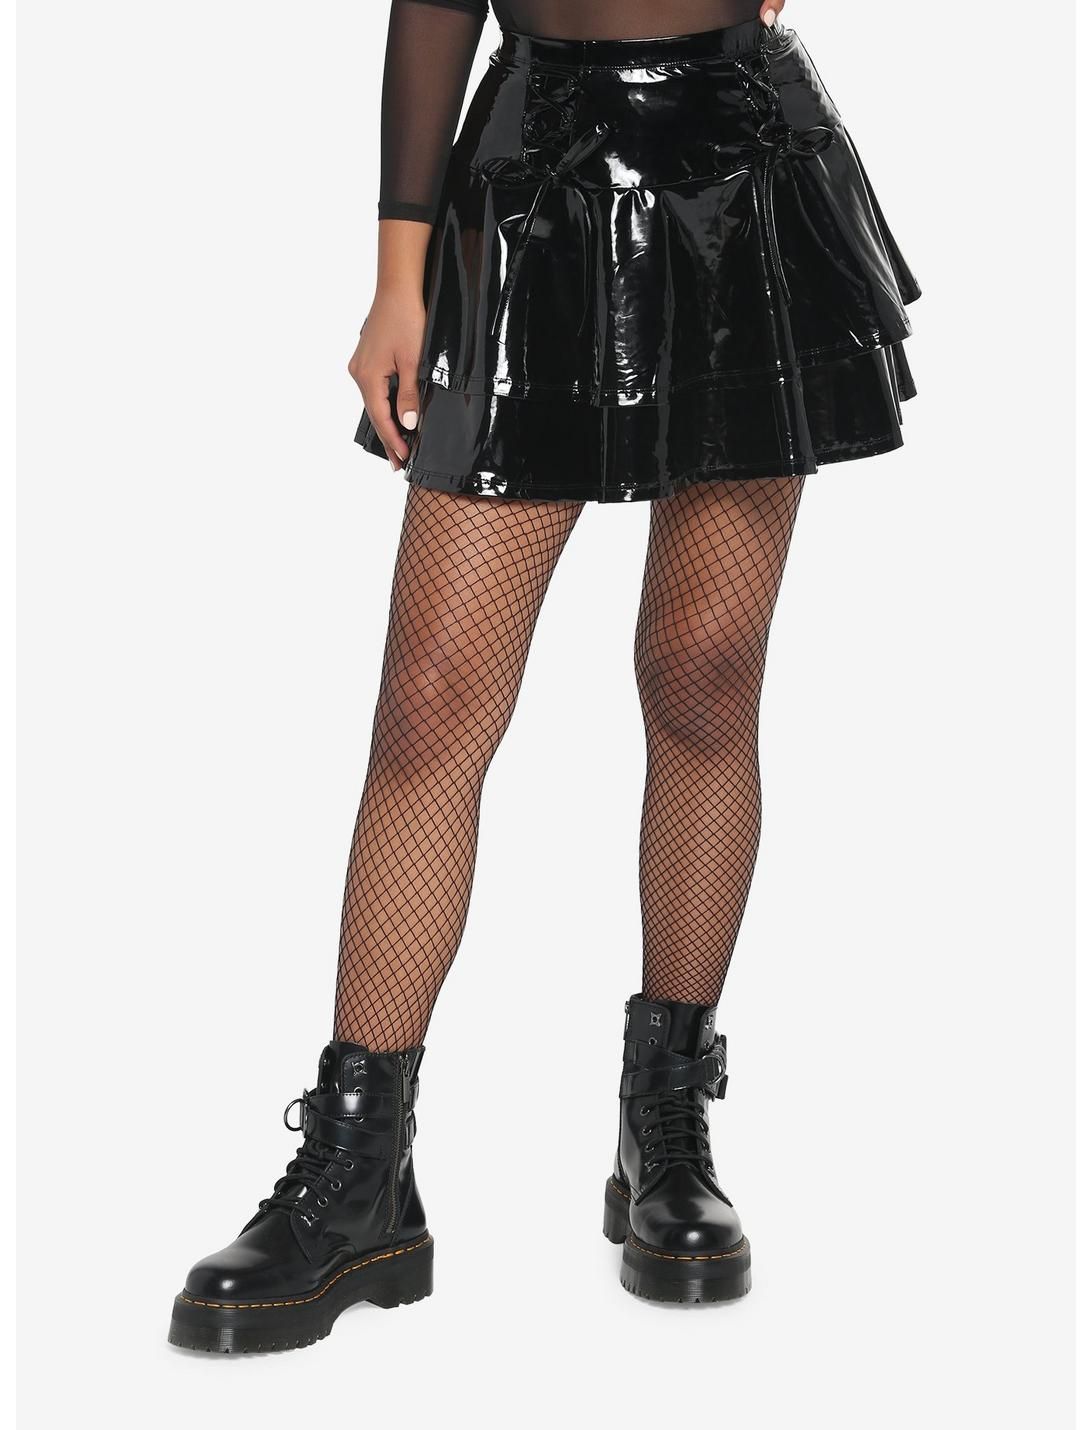 Black Faux Leather Lace-Up Tiered Skirt | Hot Topic